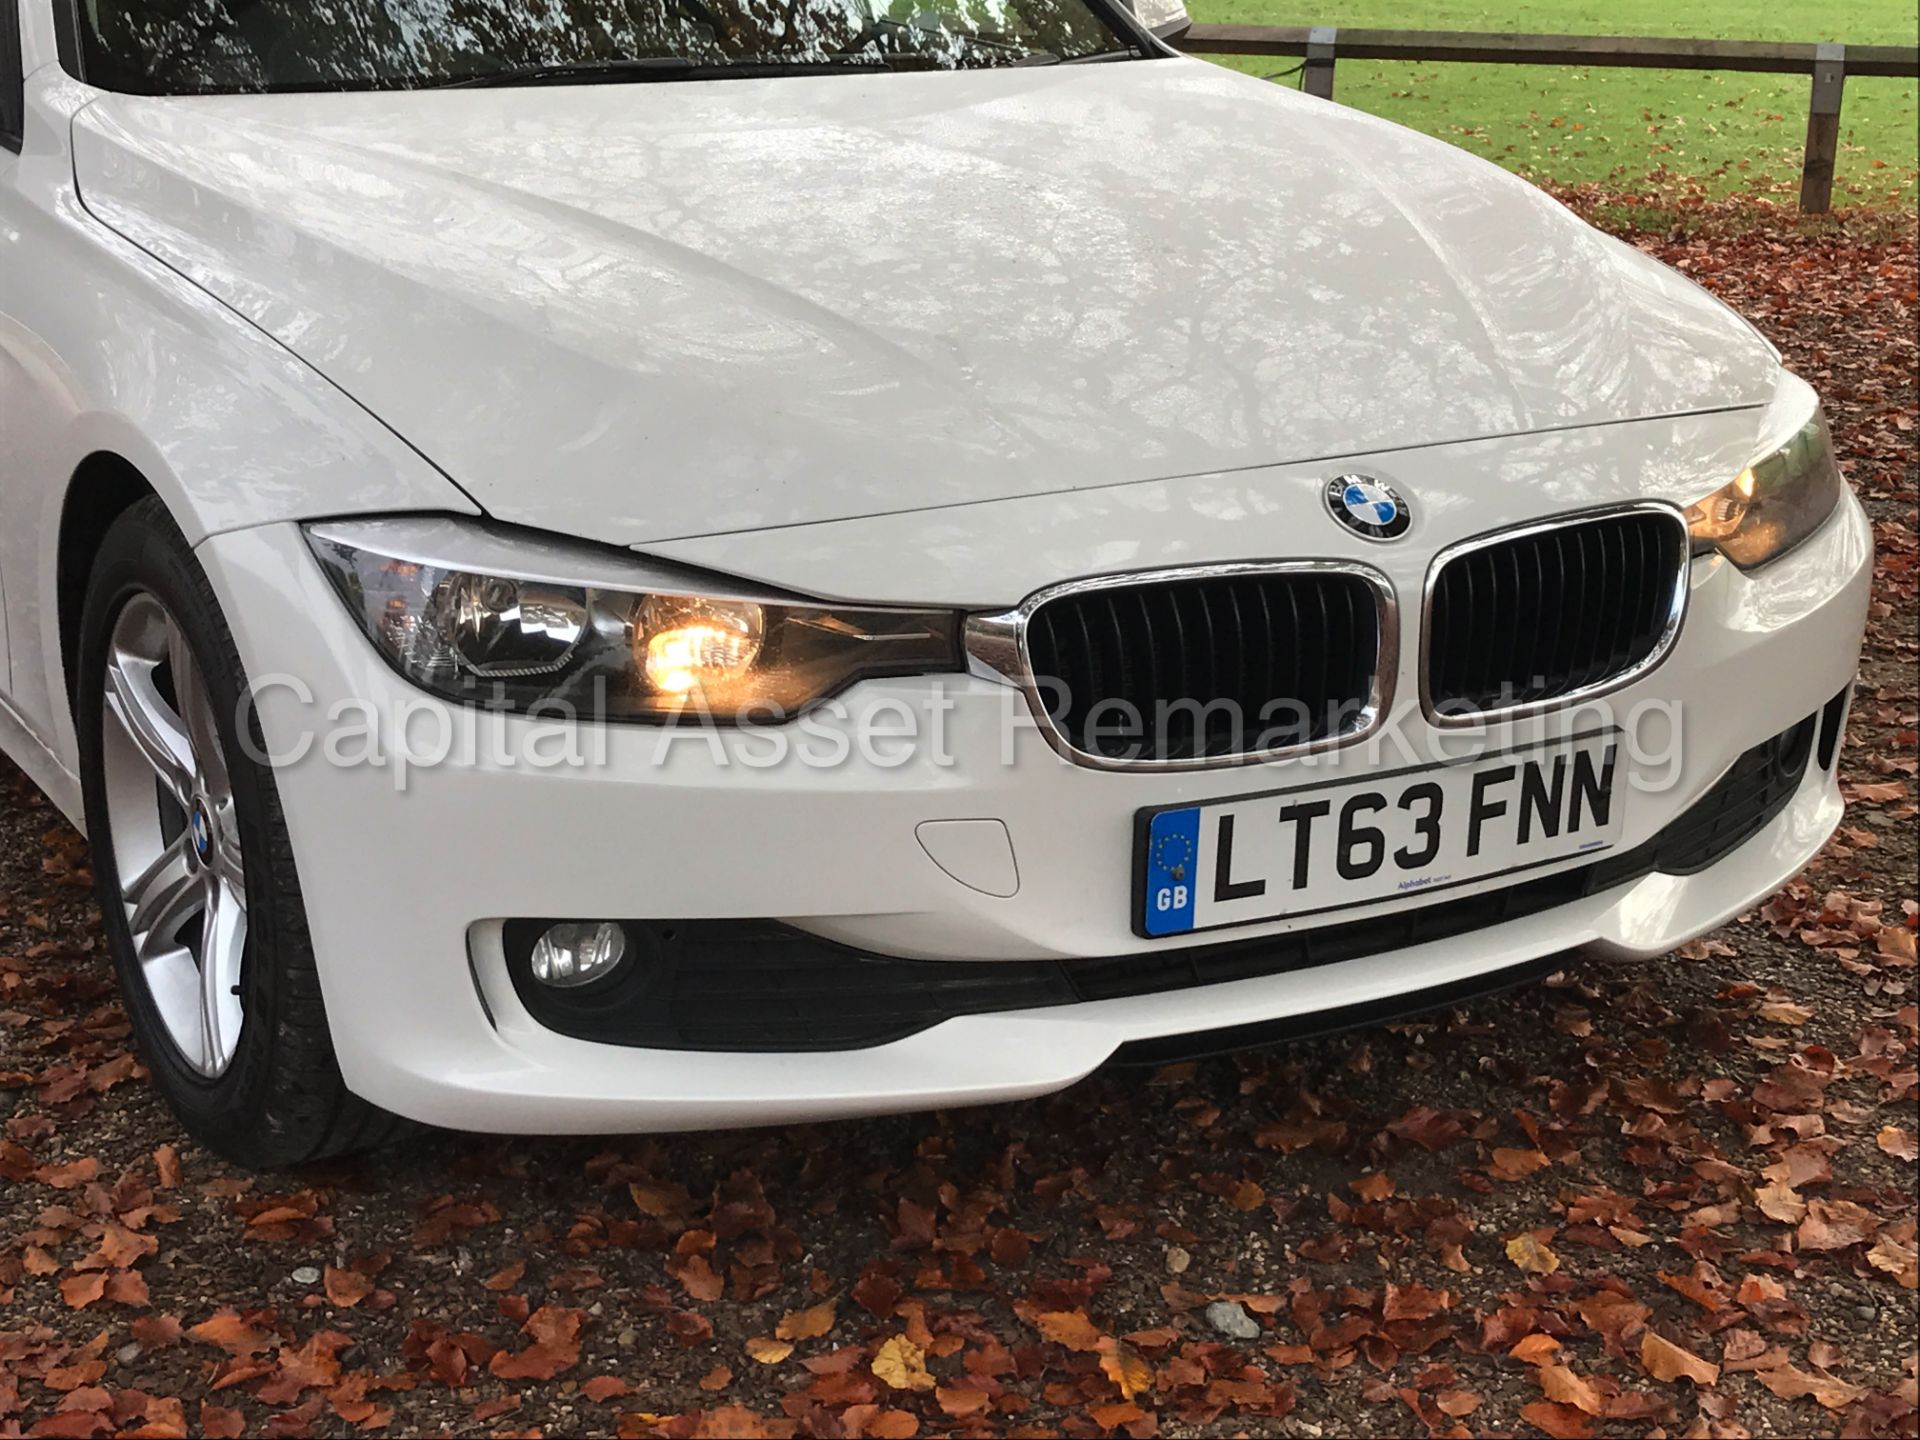 BMW 320d 'ESTATE / TOURING' (2014 MODEL) 8 SPEED AUTO - SAT NAV **FULLY LOADED** (1 OWNER FROM NEW) - Image 9 of 25